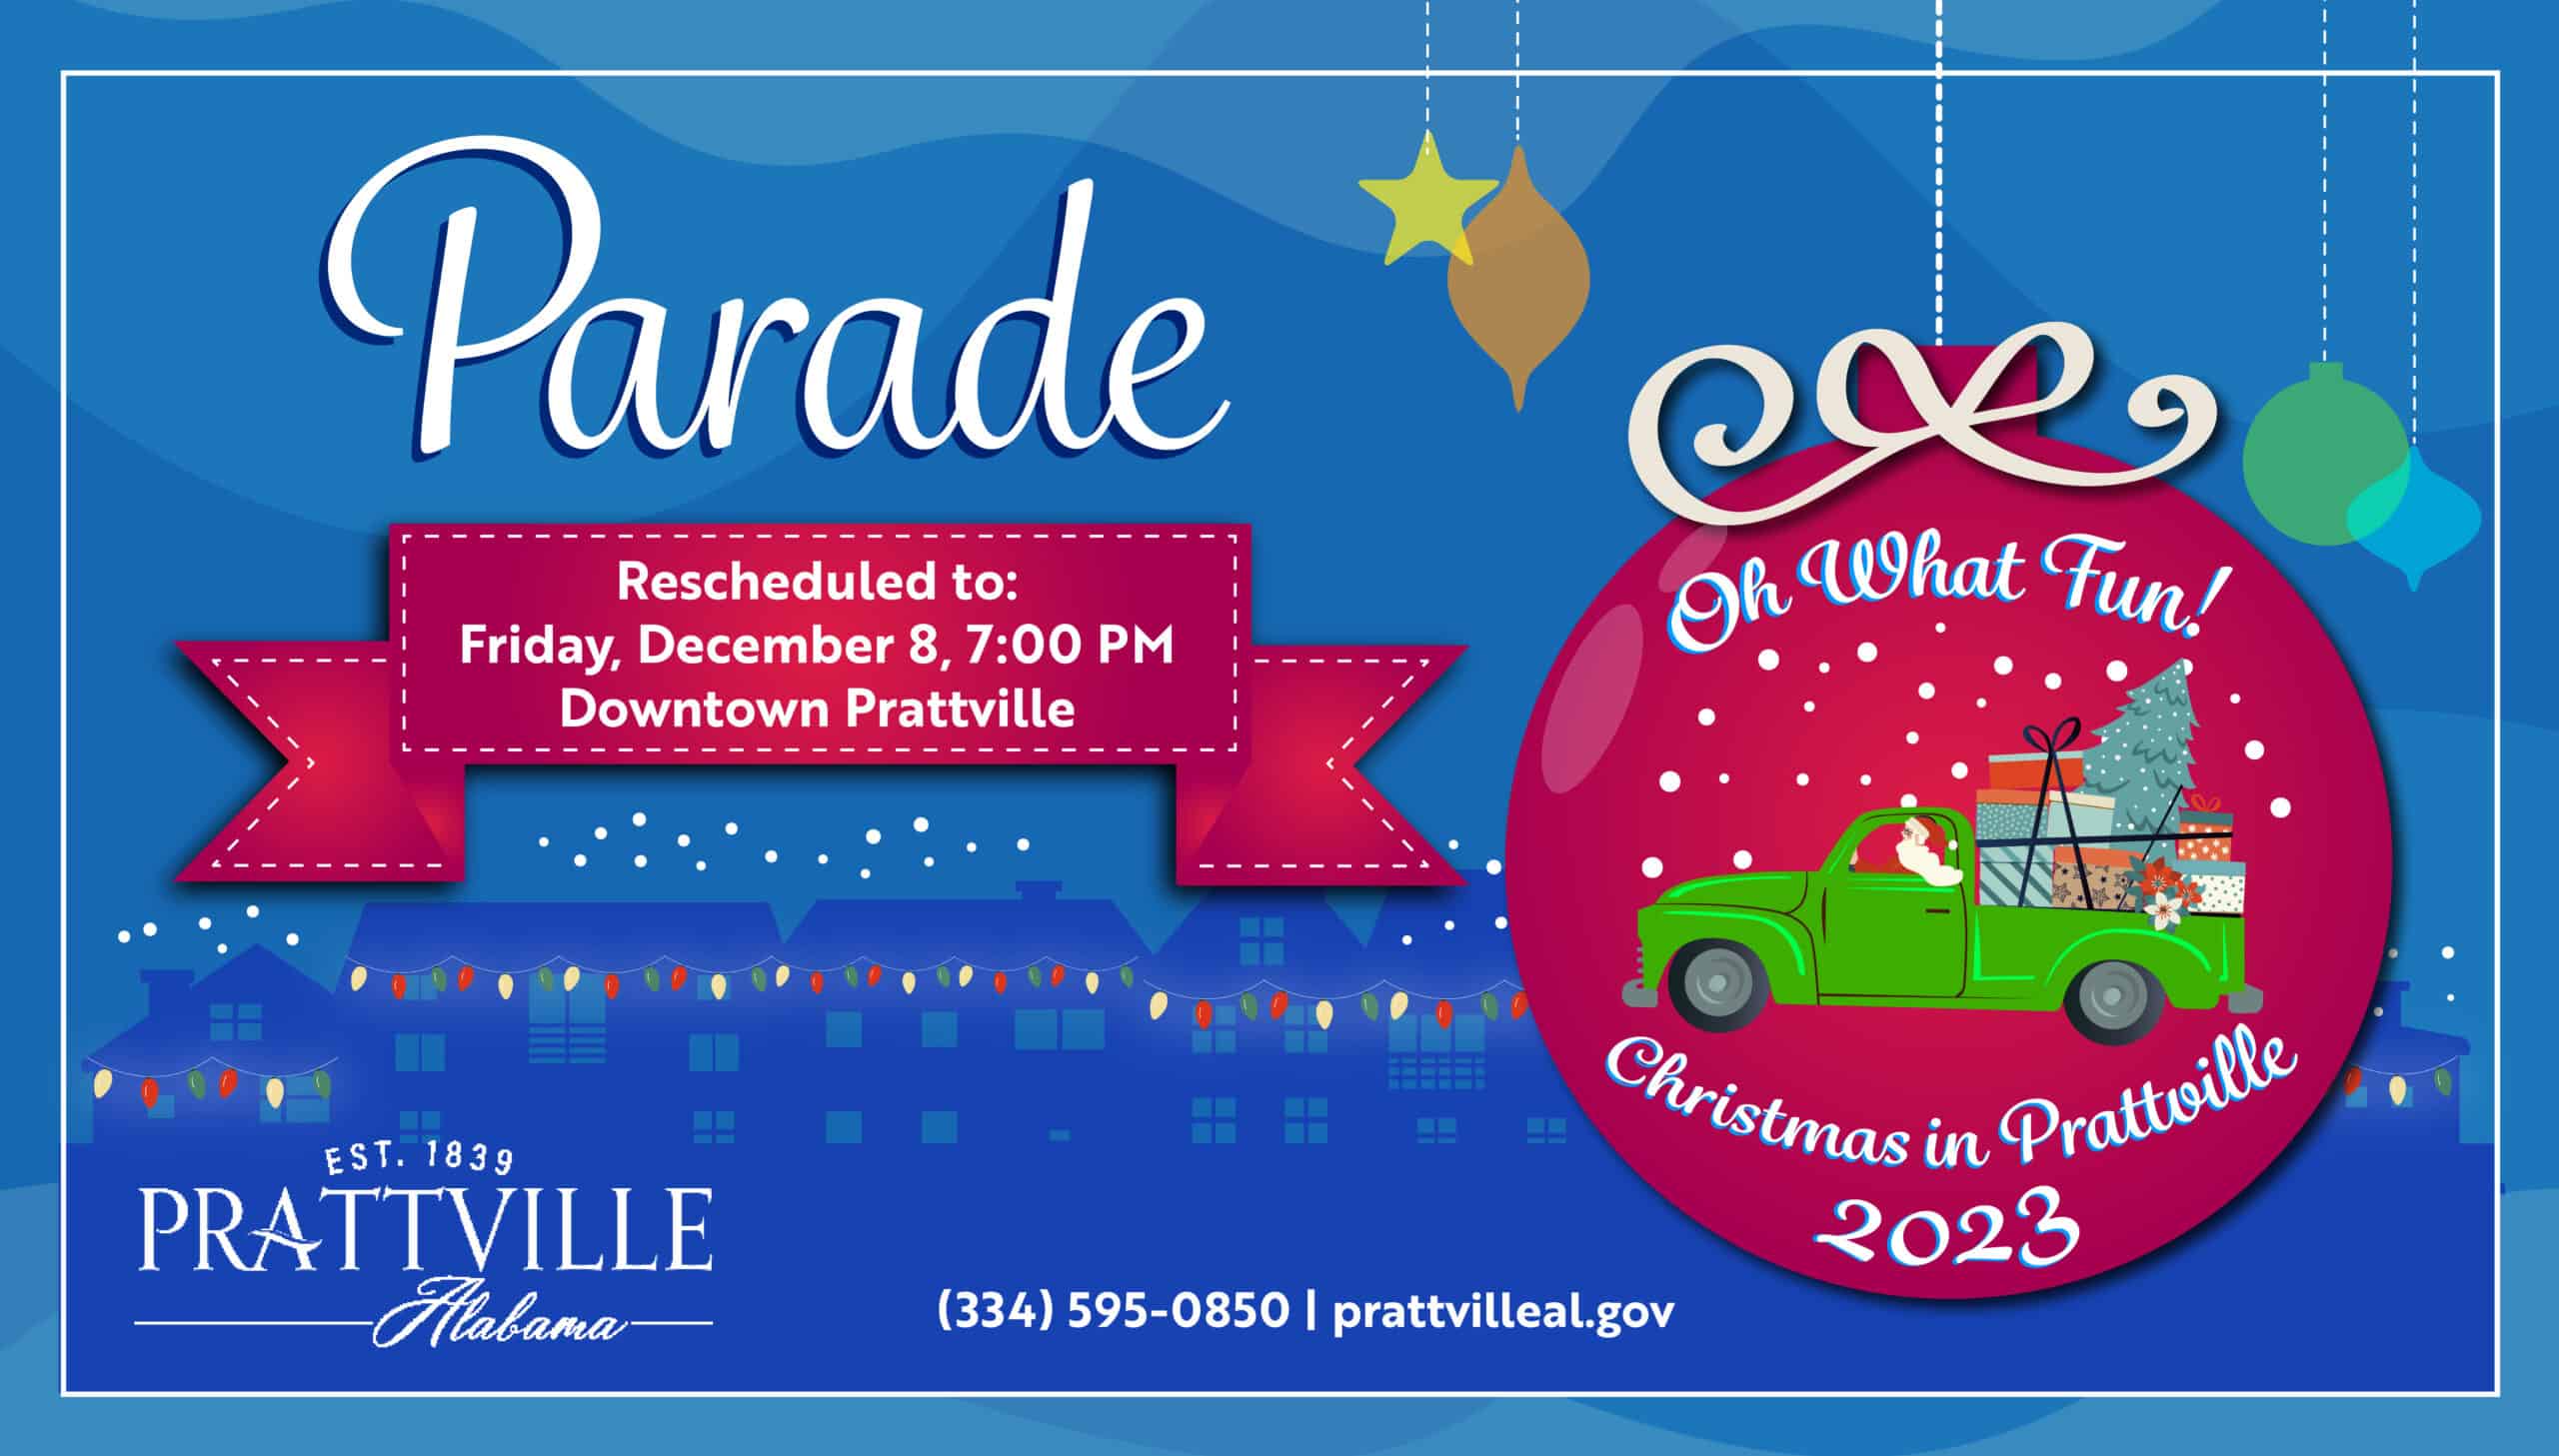 Annual Christmas Parade has been reschedule to Friday, December 8, 2023.